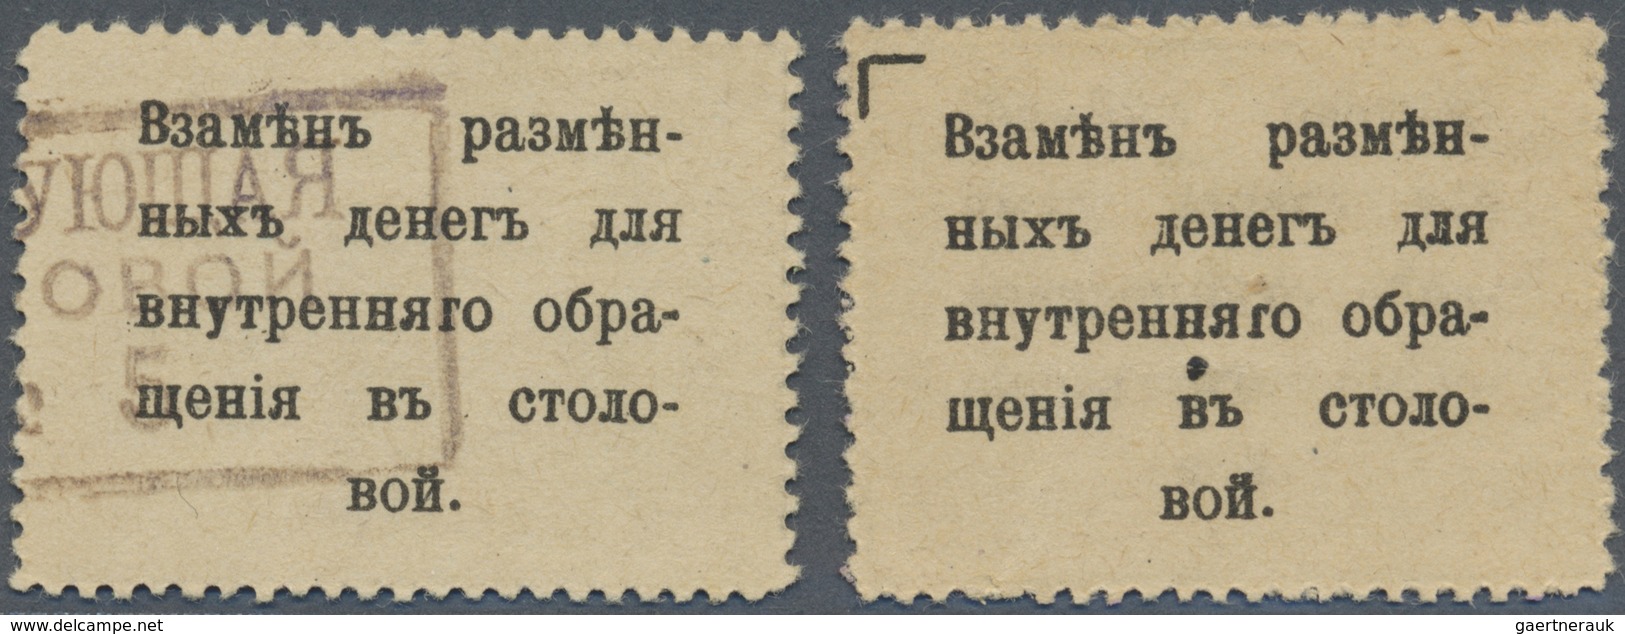 Russia / Russland: CENTROSOJUS Canteen Stamp Money 20 And 50 Kopeks Without Date, P.NL In UNC Condit - Russia